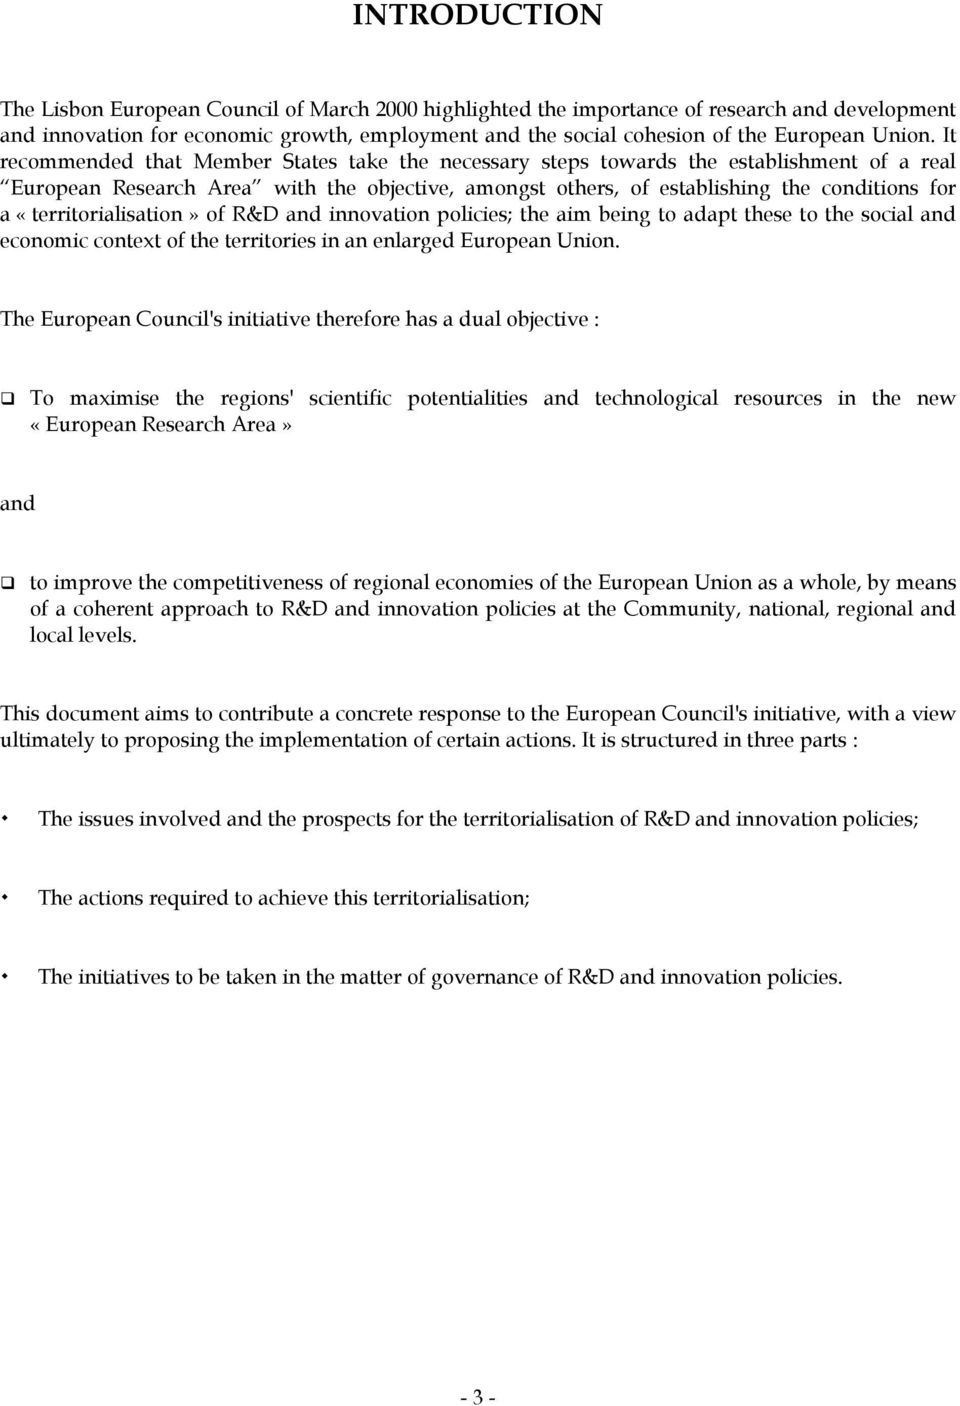 It recommended that Member States take the necessary steps towards the establishment of a real European Research Area with the objective, amongst others, of establishing the conditions for a